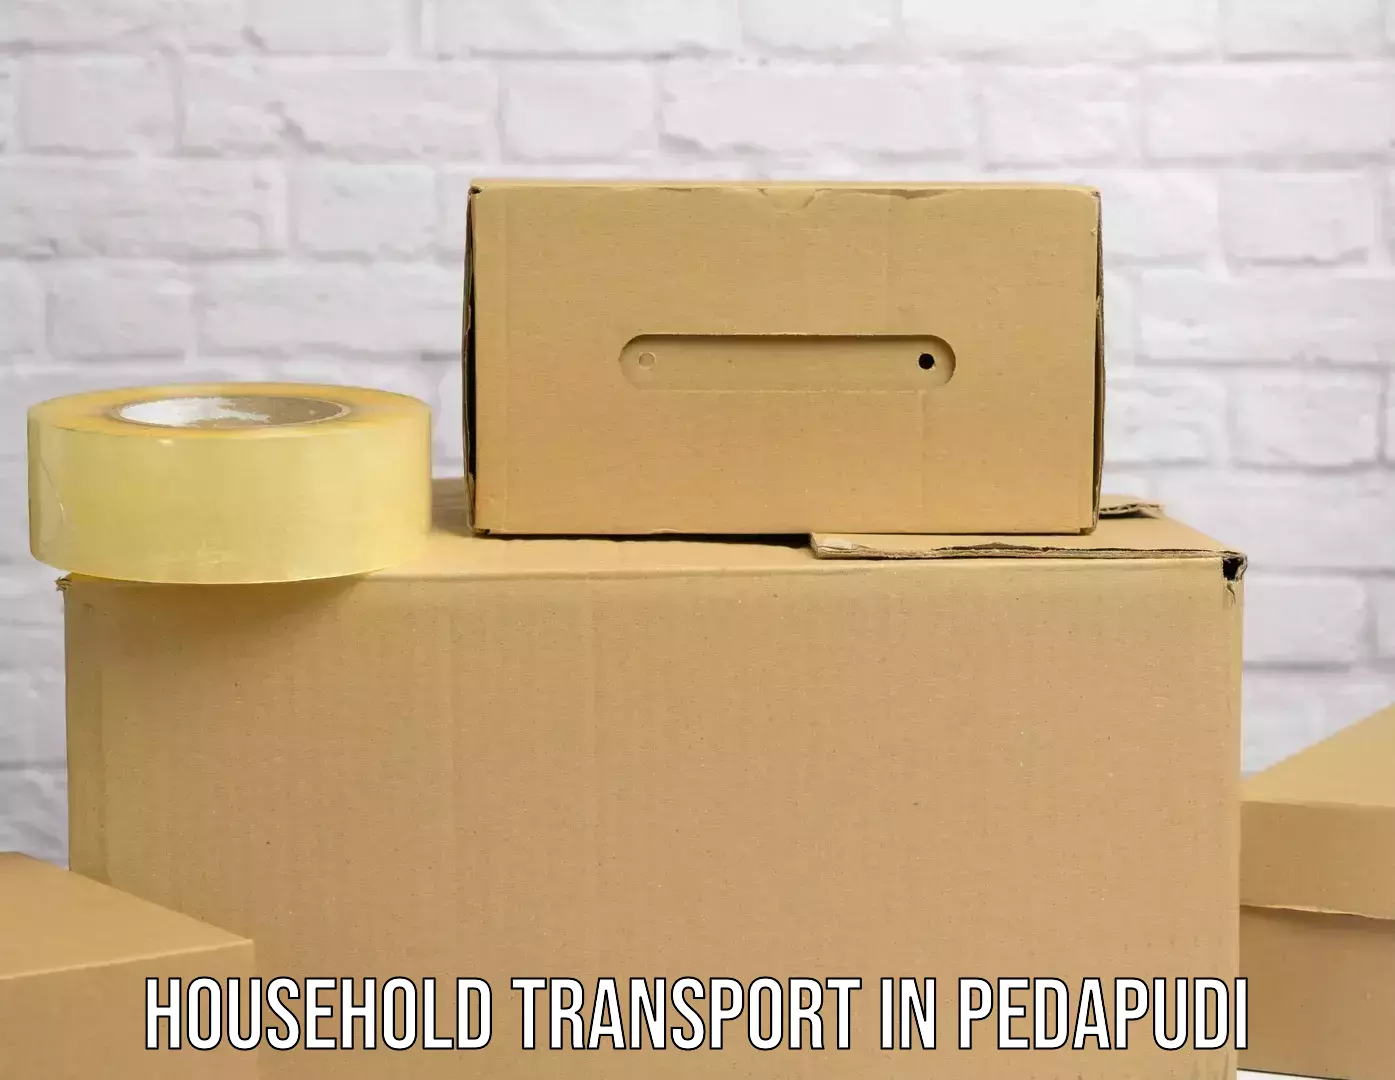 Household goods transport service in Pedapudi